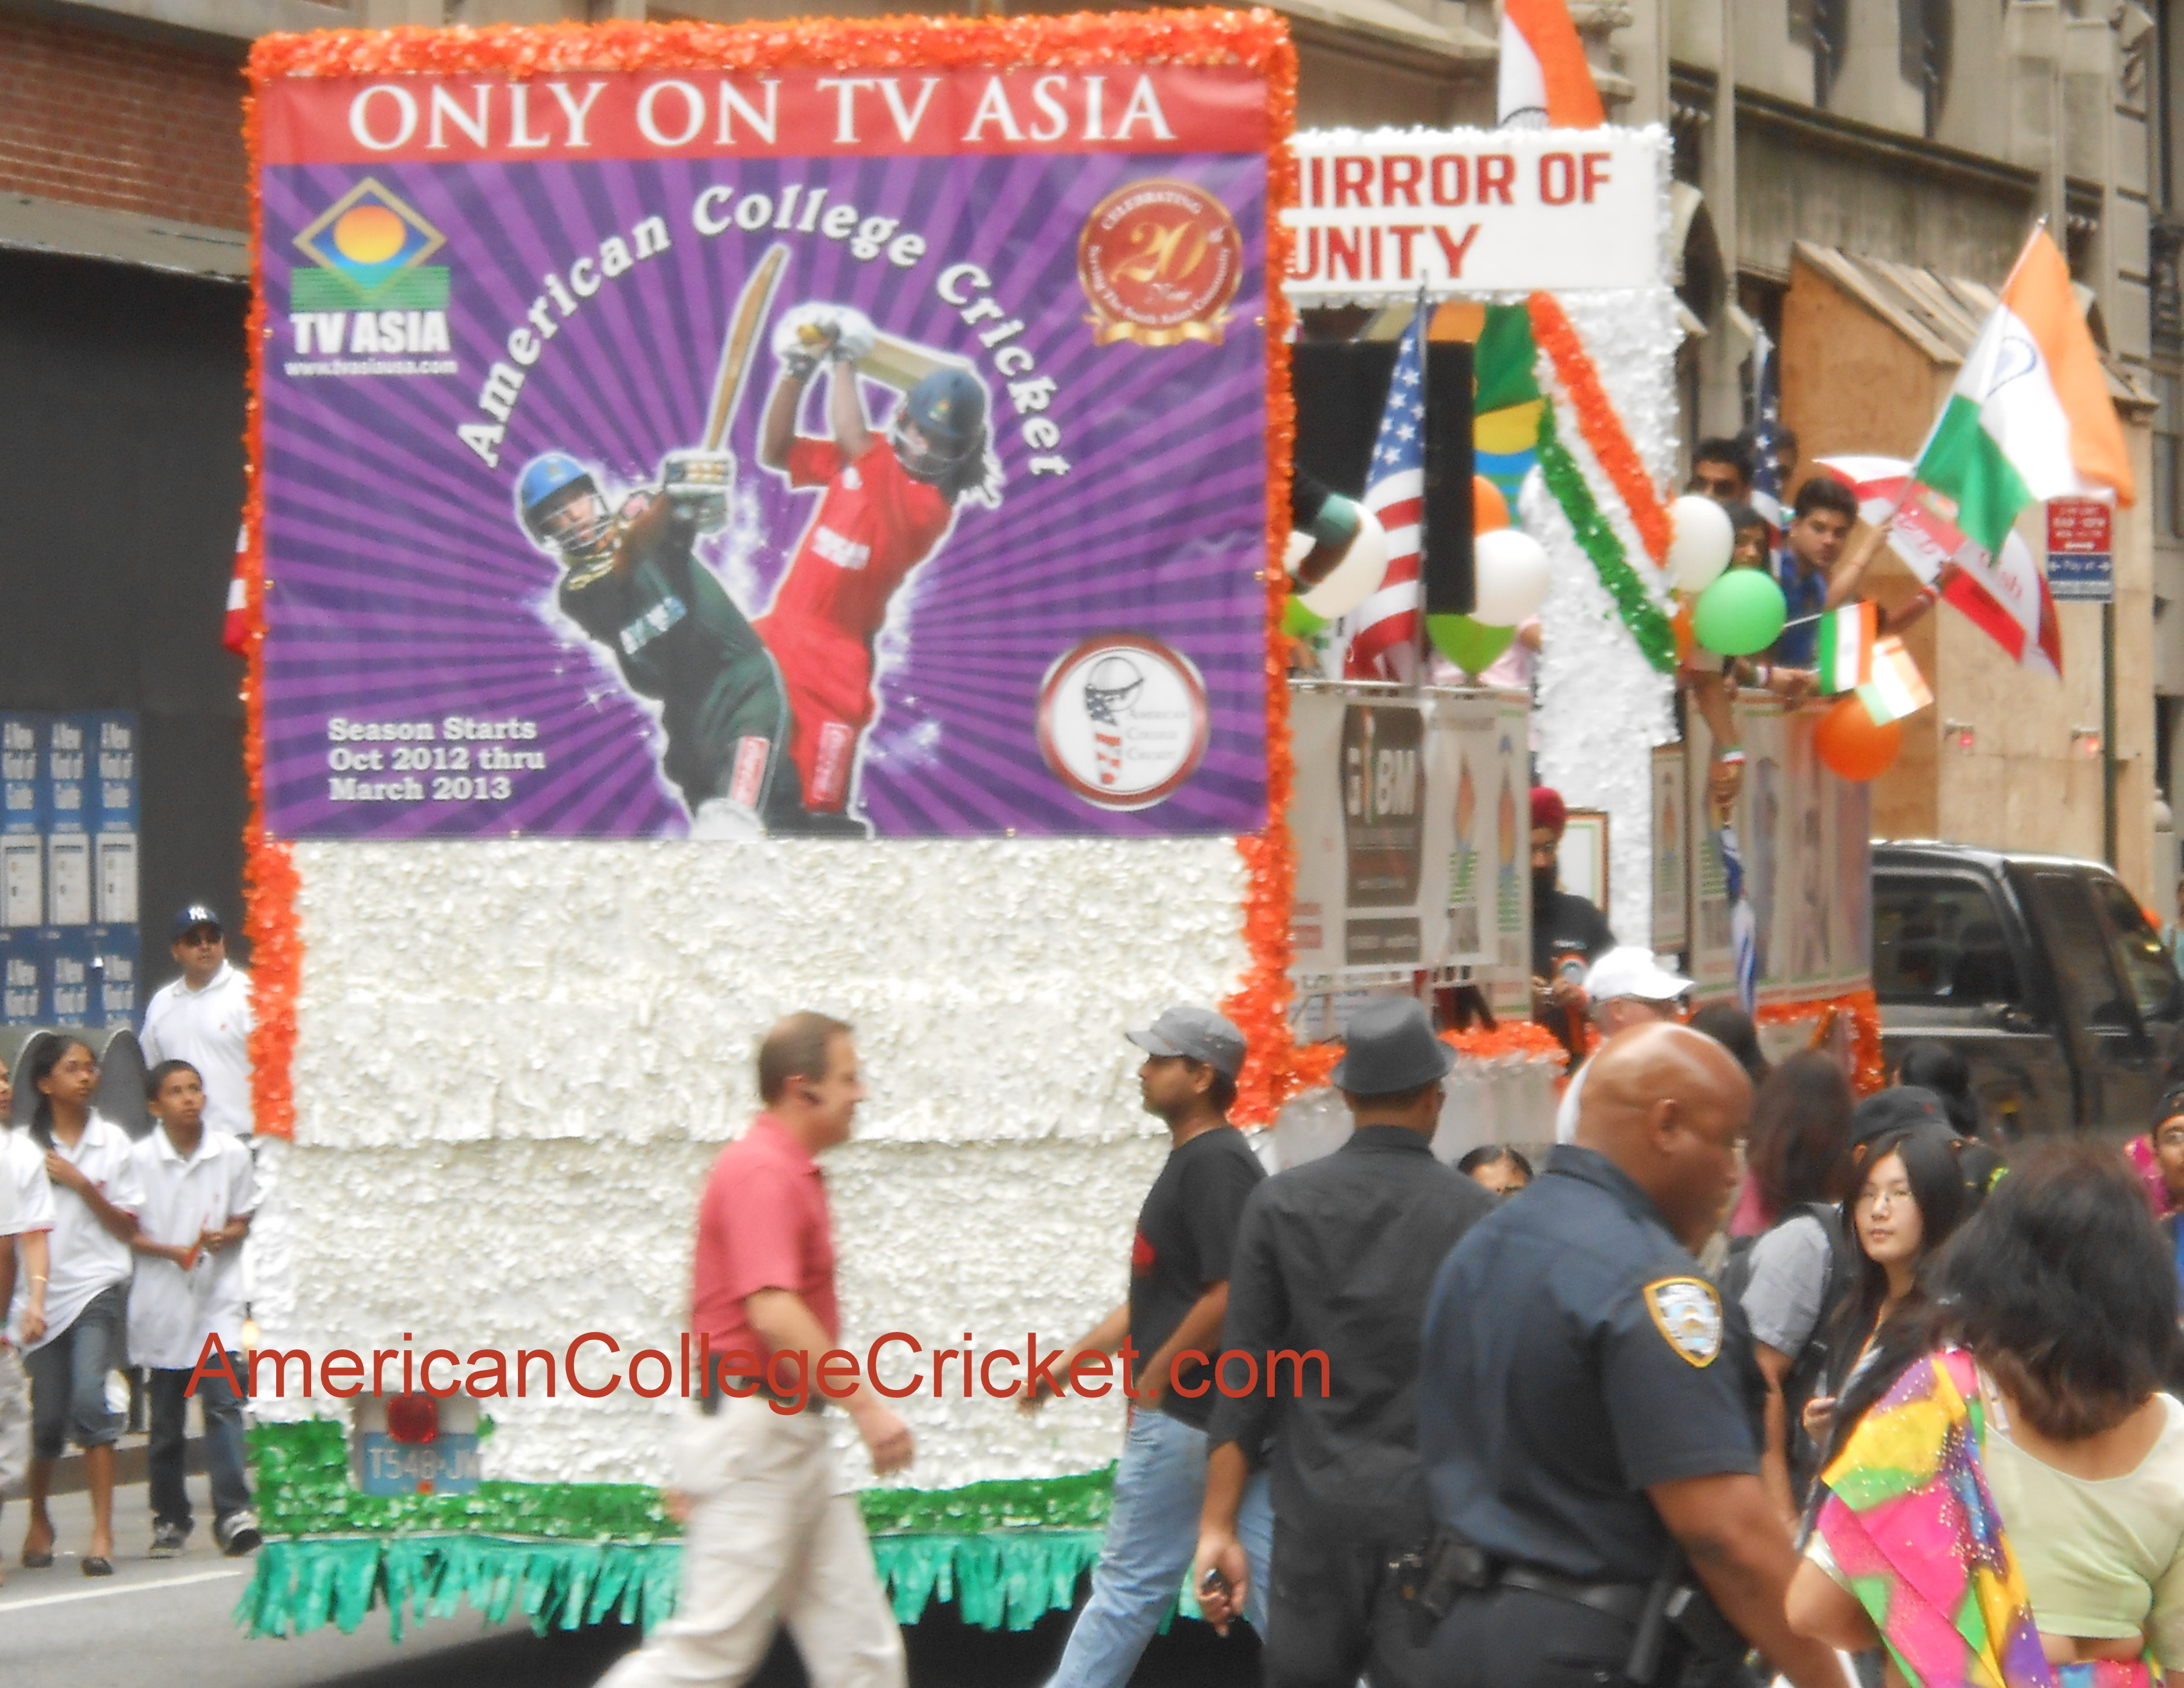 Anil Kumble,Saif Ali Khan,TV Asia,American College Cricket and Espn in India Day Parade! « American College Cricket